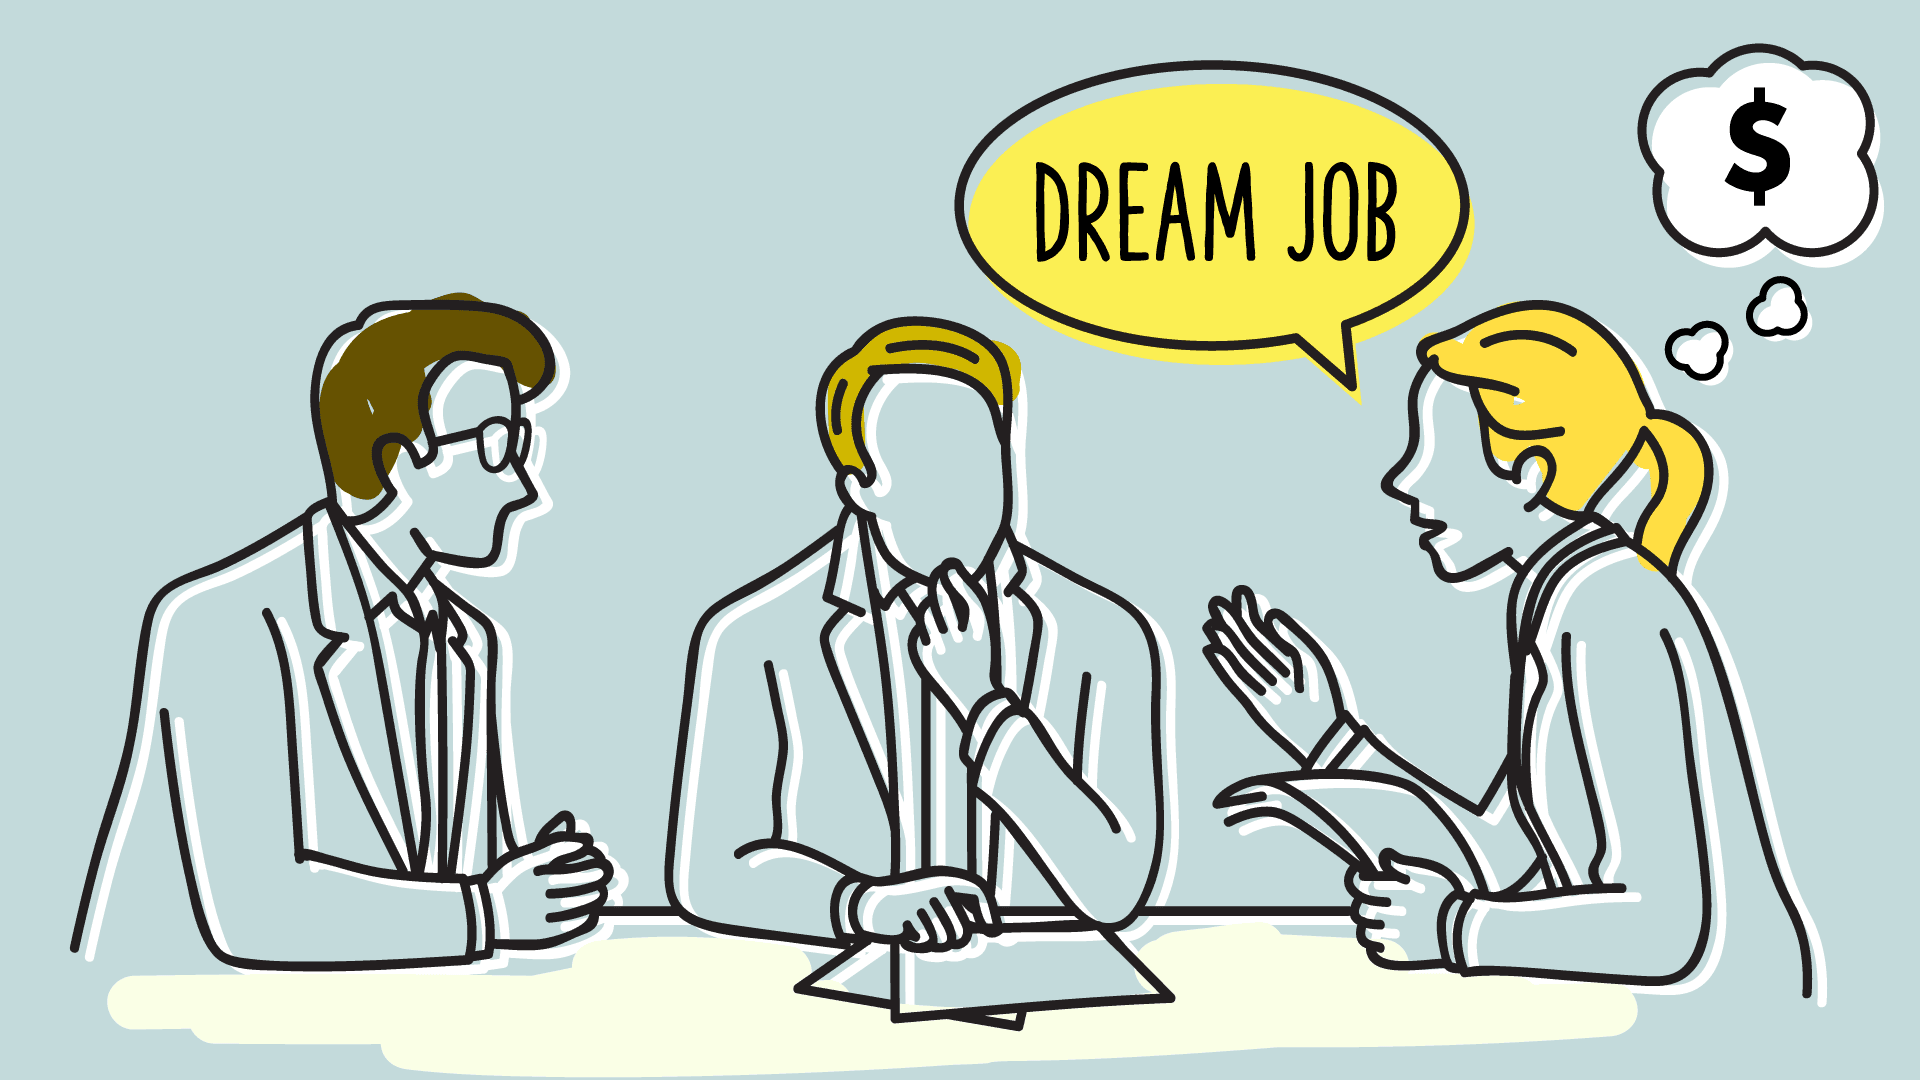 Illustration of two men and a woman at a job interview. The woman has a yellow speech bubble that says "Dream job" and a white thought bubble with a dollar sign